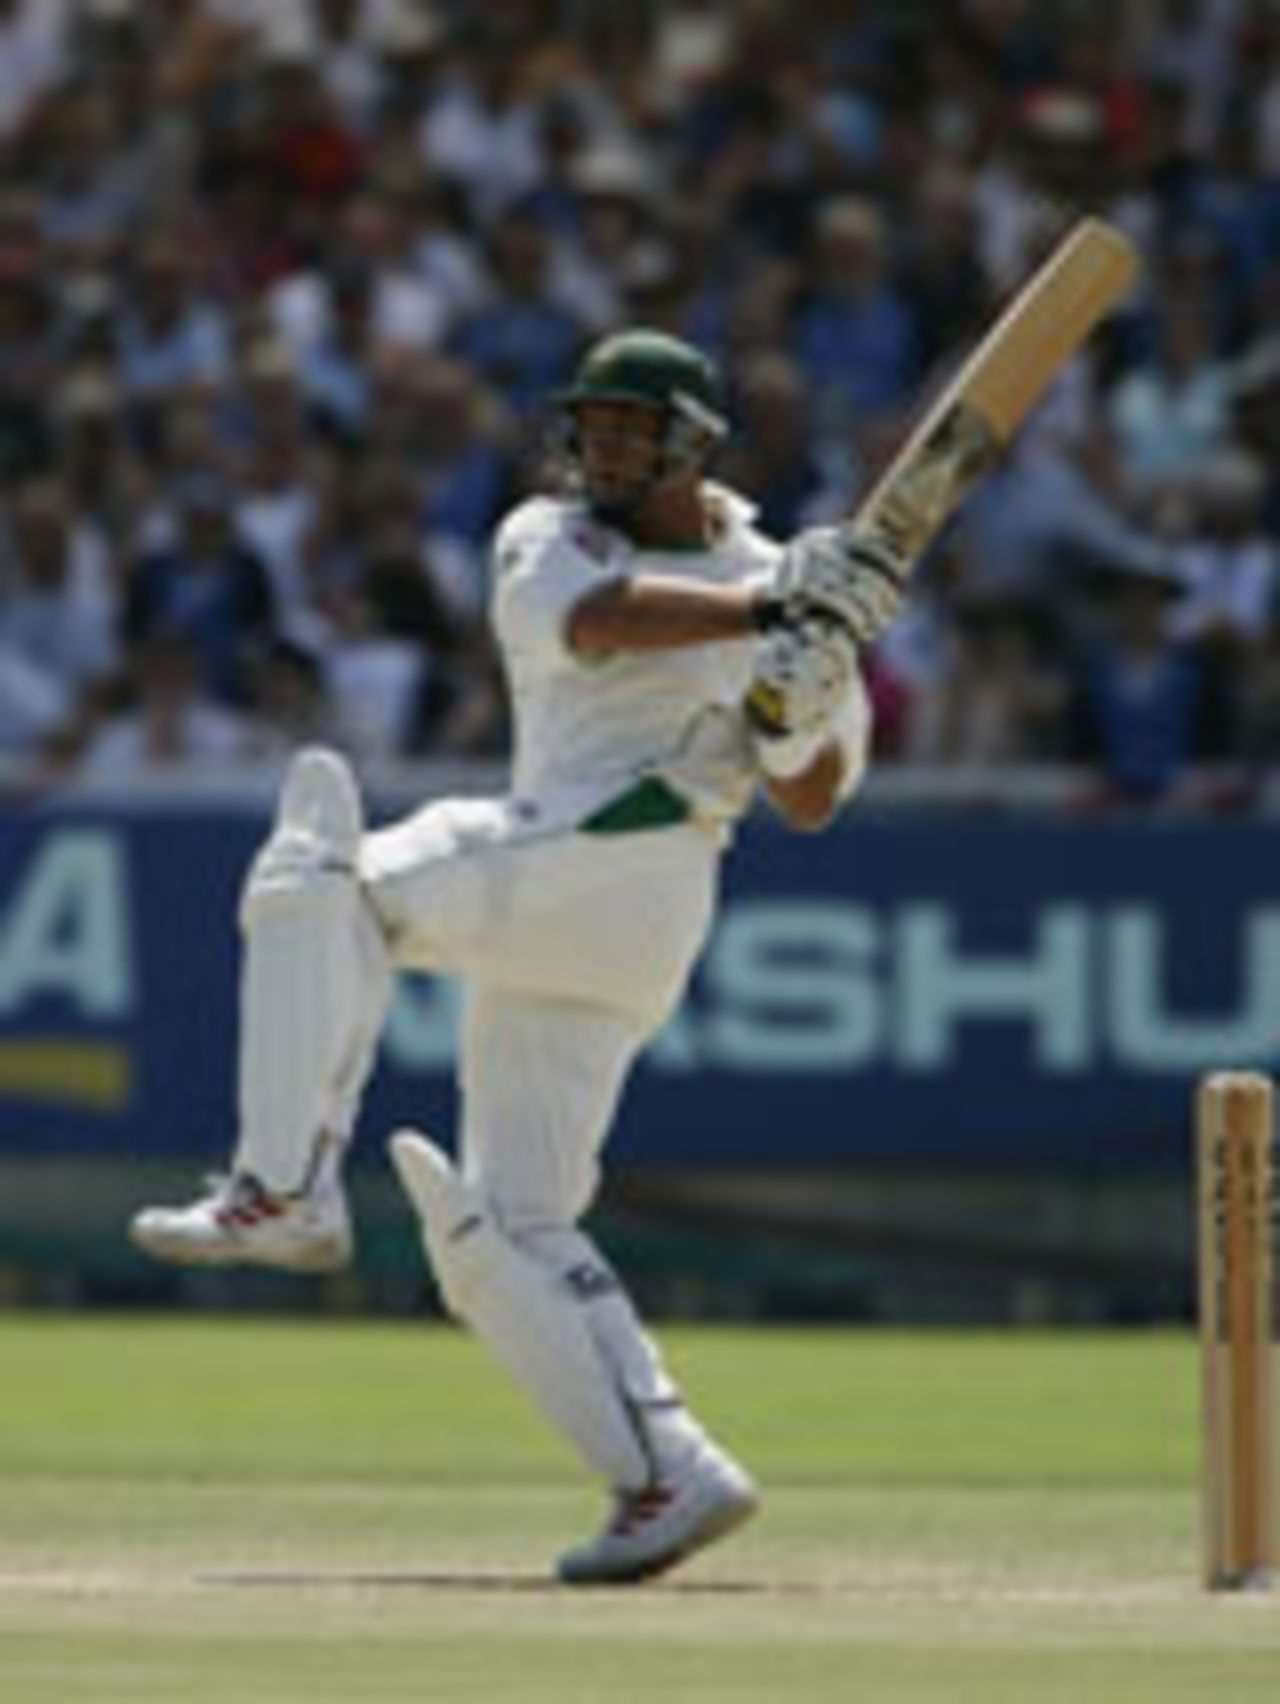 Jacques Kallis hits out, South Africa v England, 3rd Test, Cape Town, 1st day, January 2, 2005